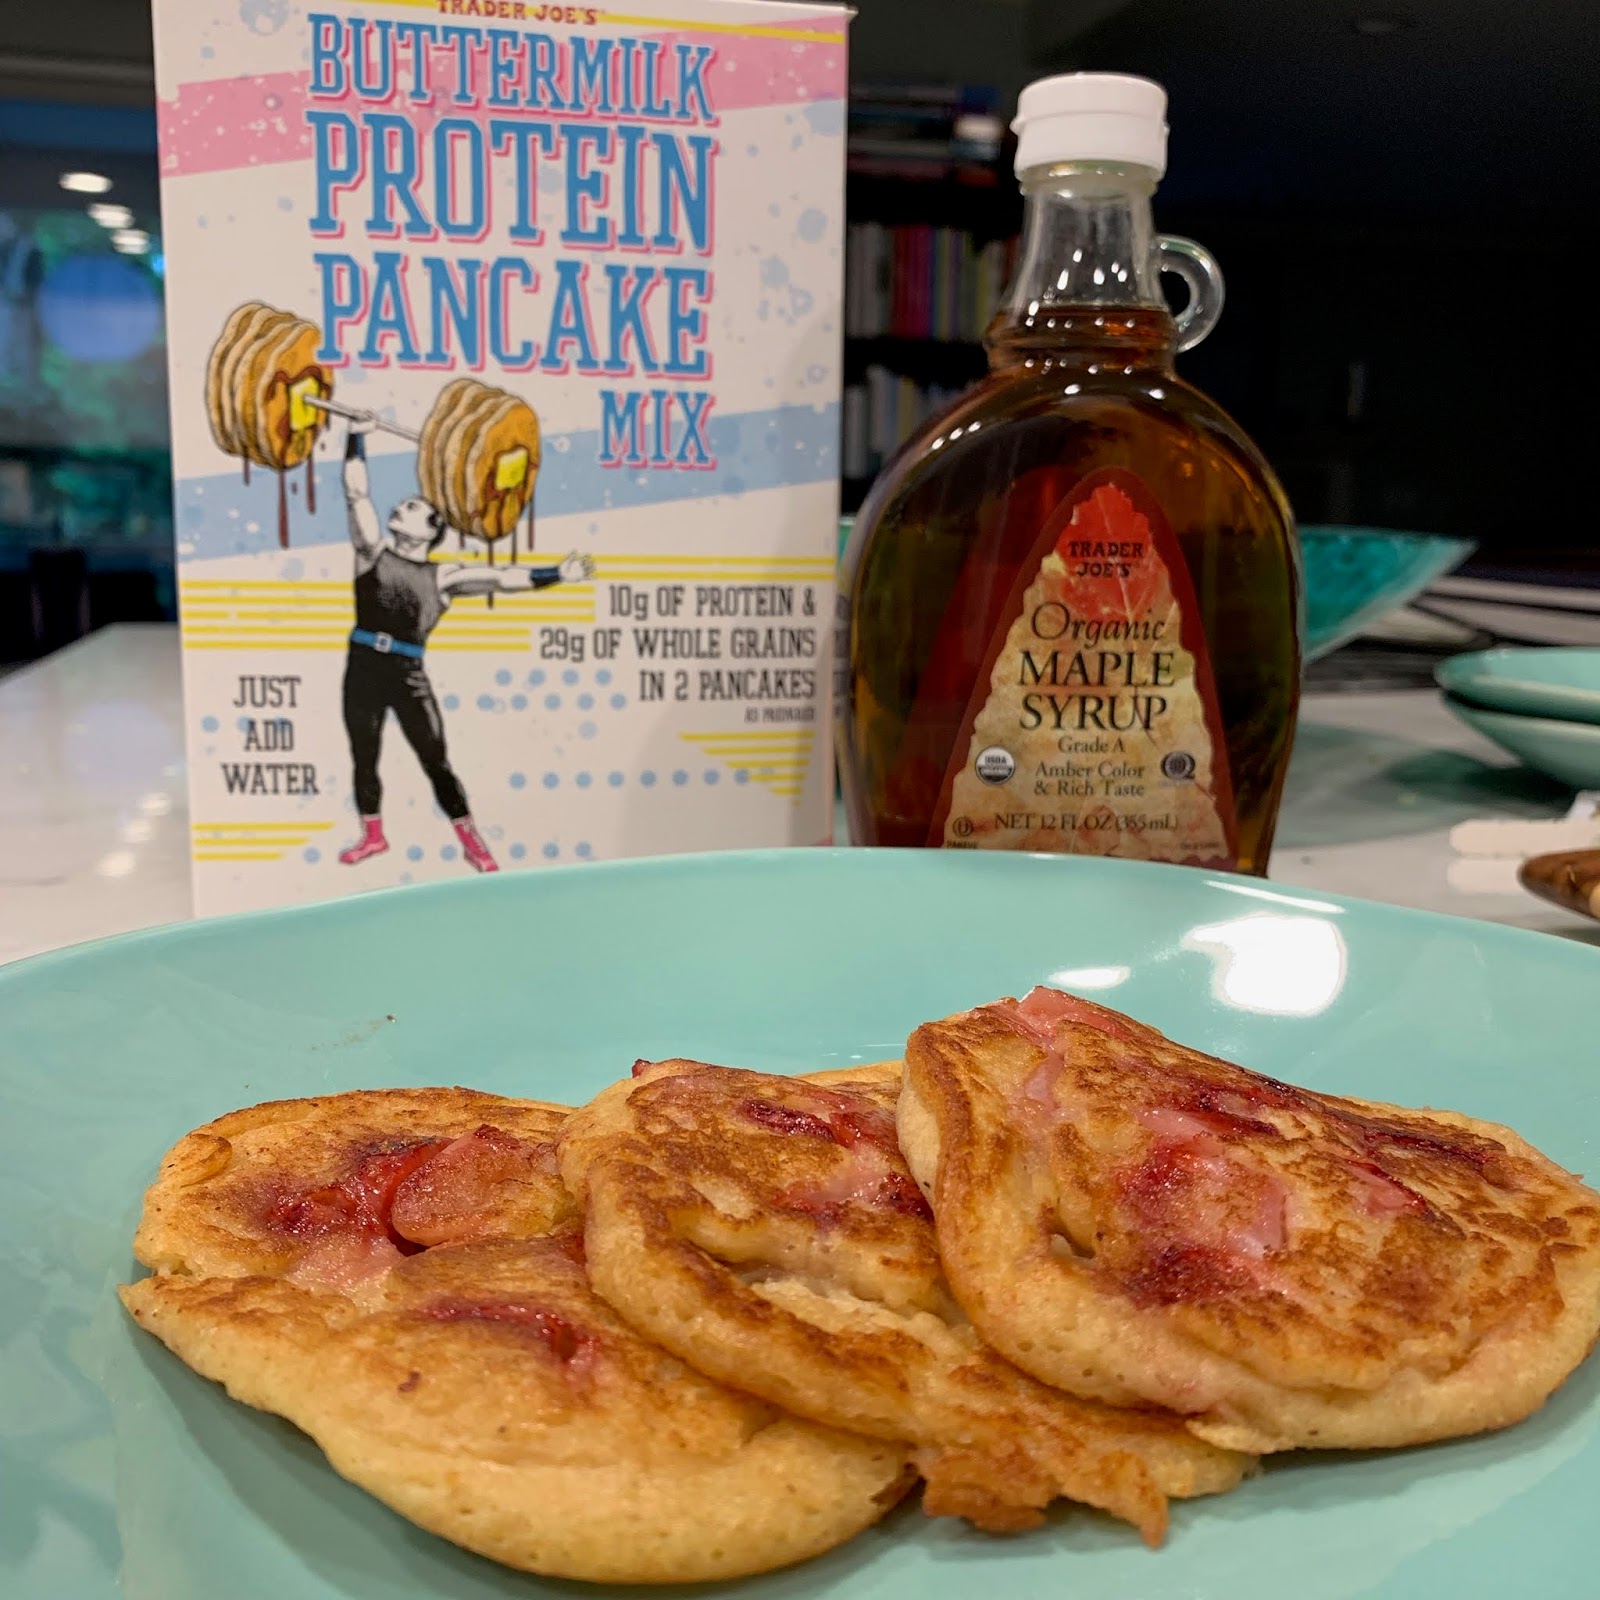 røgelse Foresee Mentalt the happygirl: Essentials: Trader Joe's Buttermilk Protein Pancake Mix ( Review)